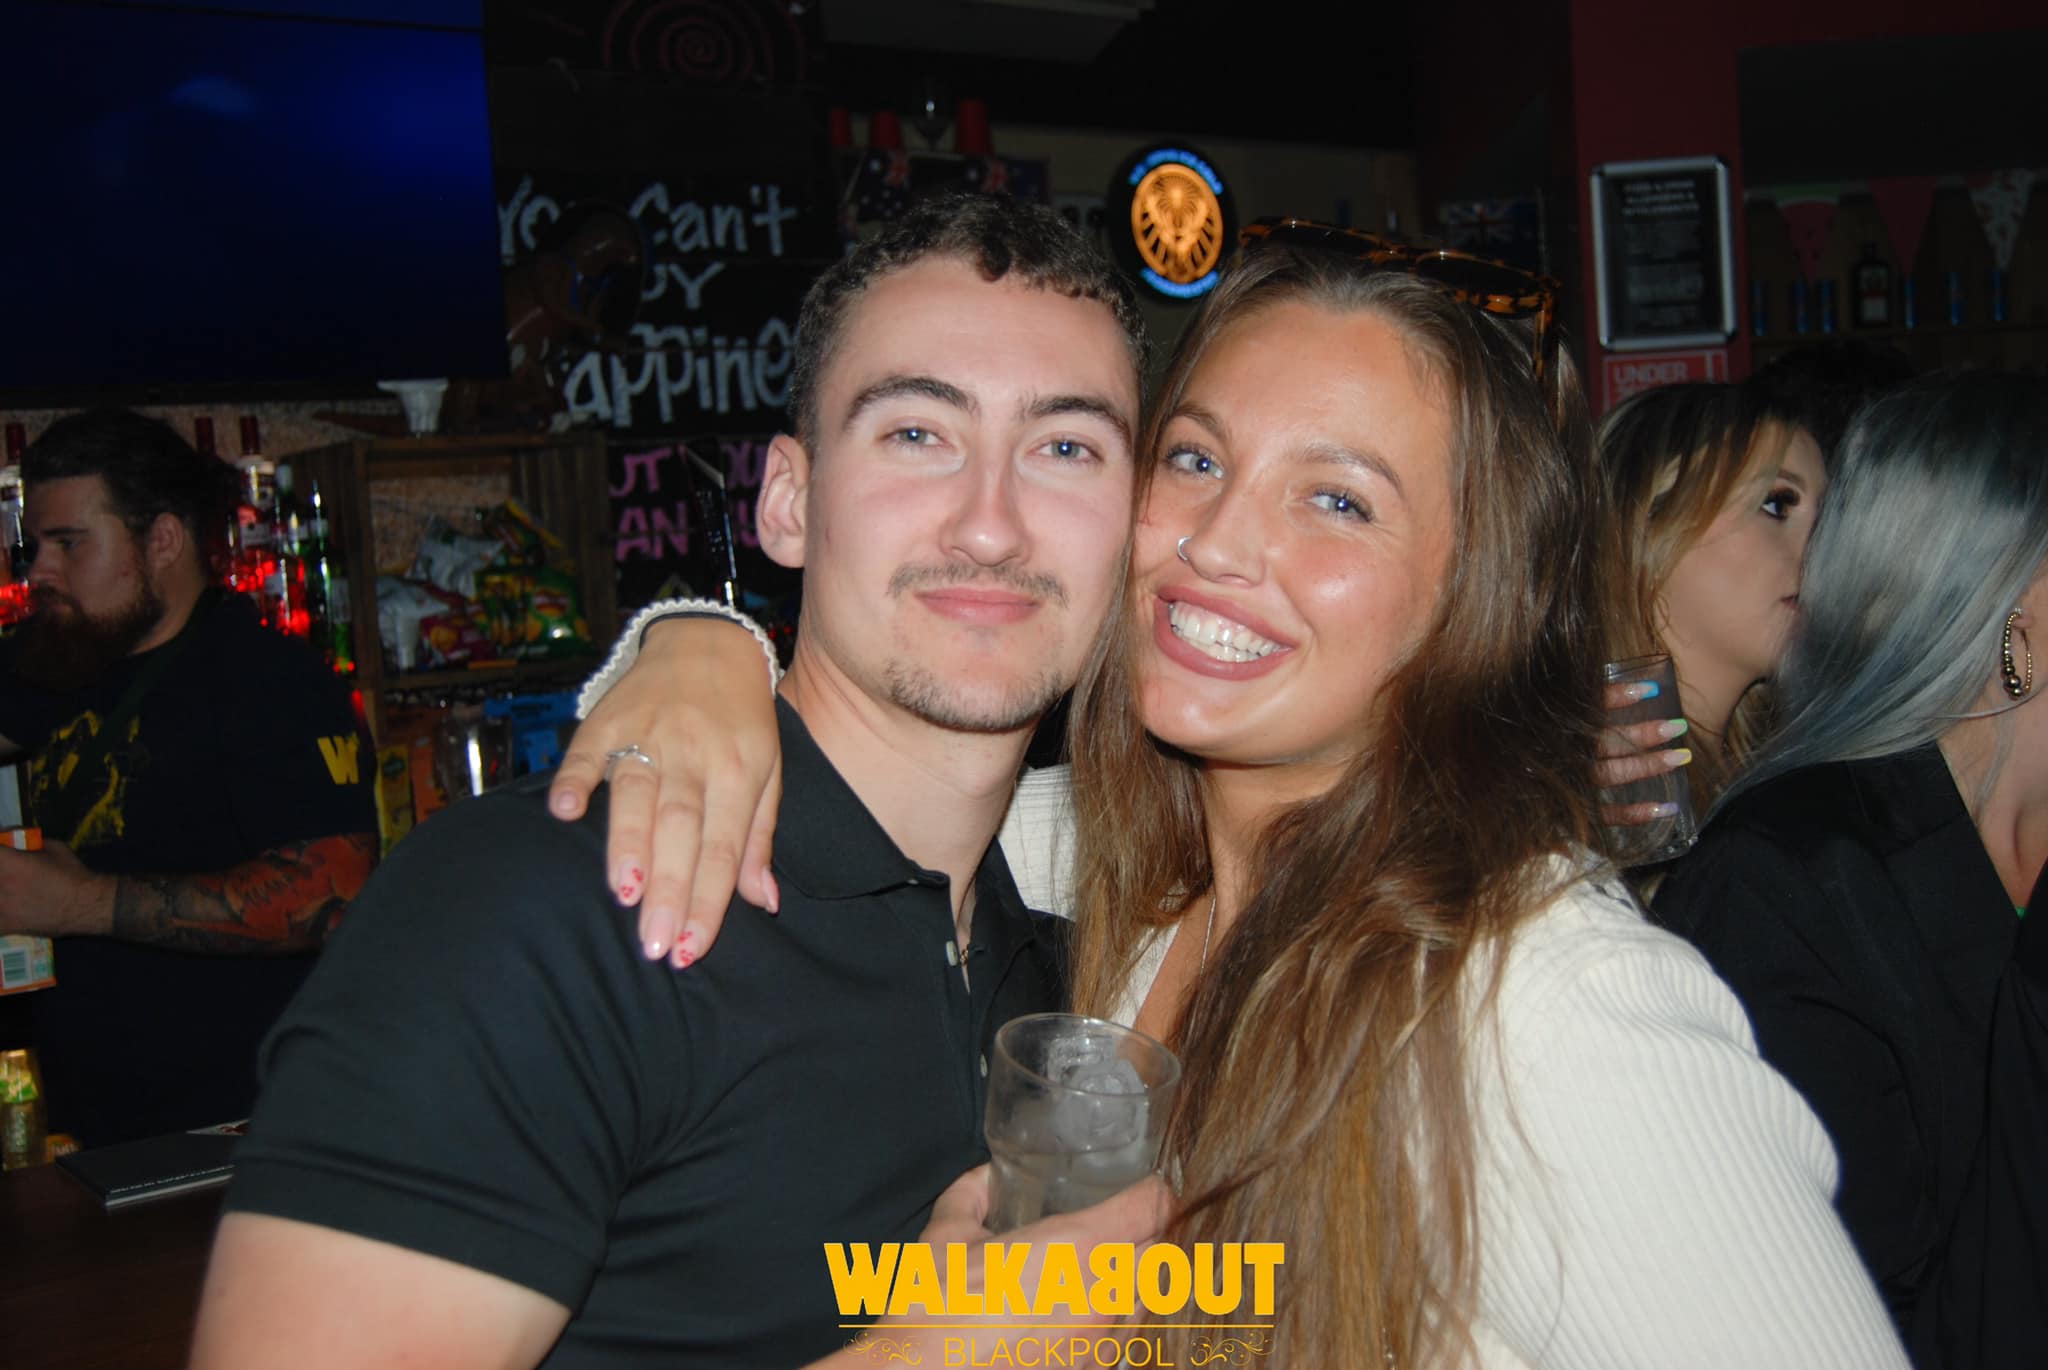 Walkabout, Blackpool